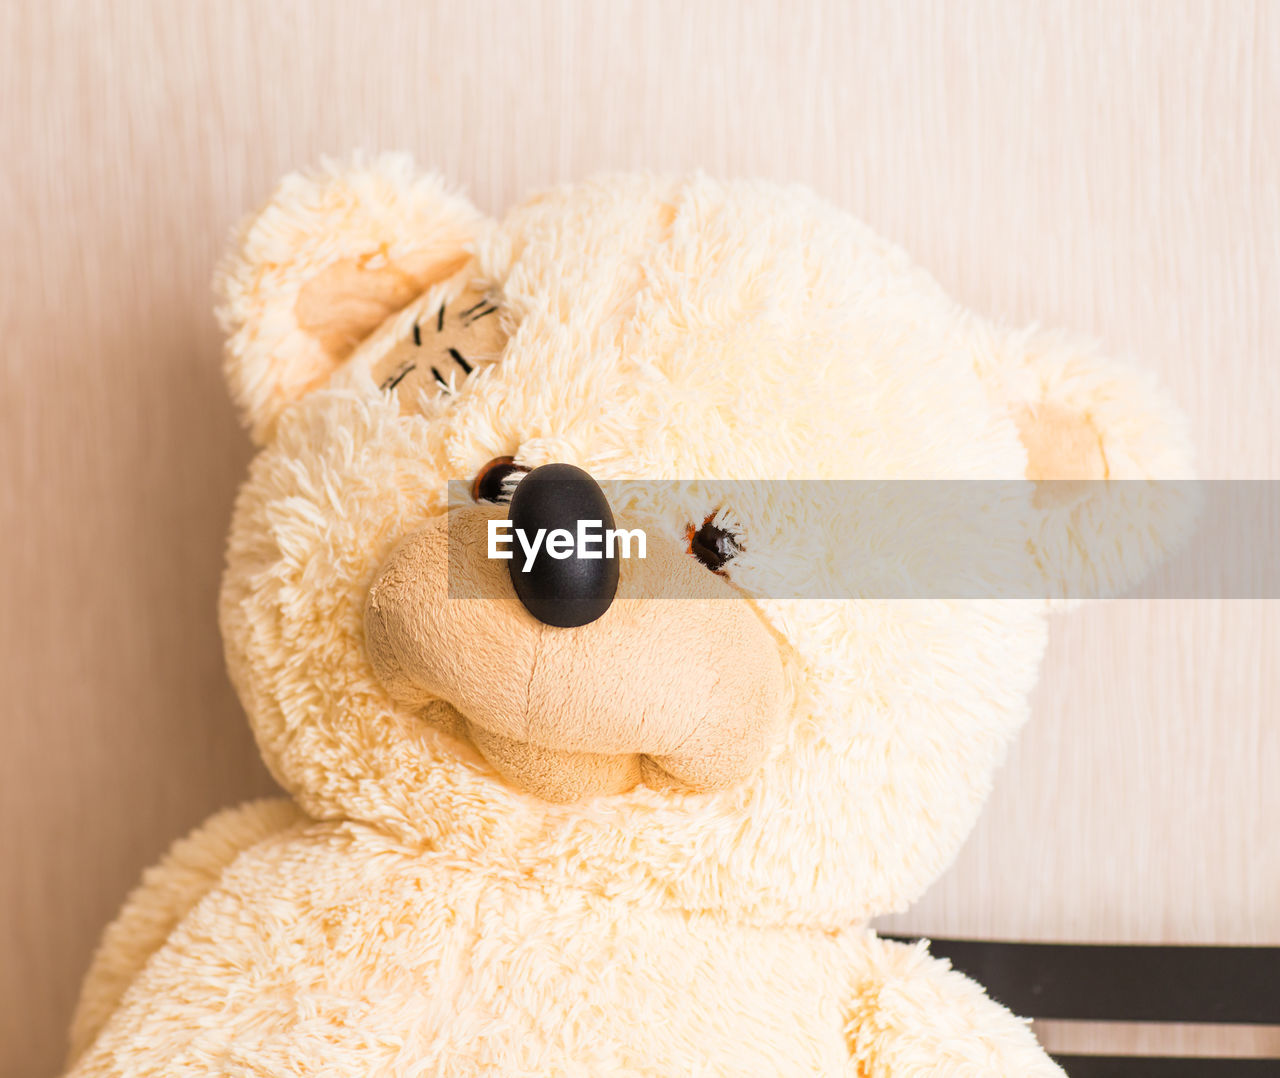 HIGH ANGLE VIEW OF STUFFED TOY ON WALL